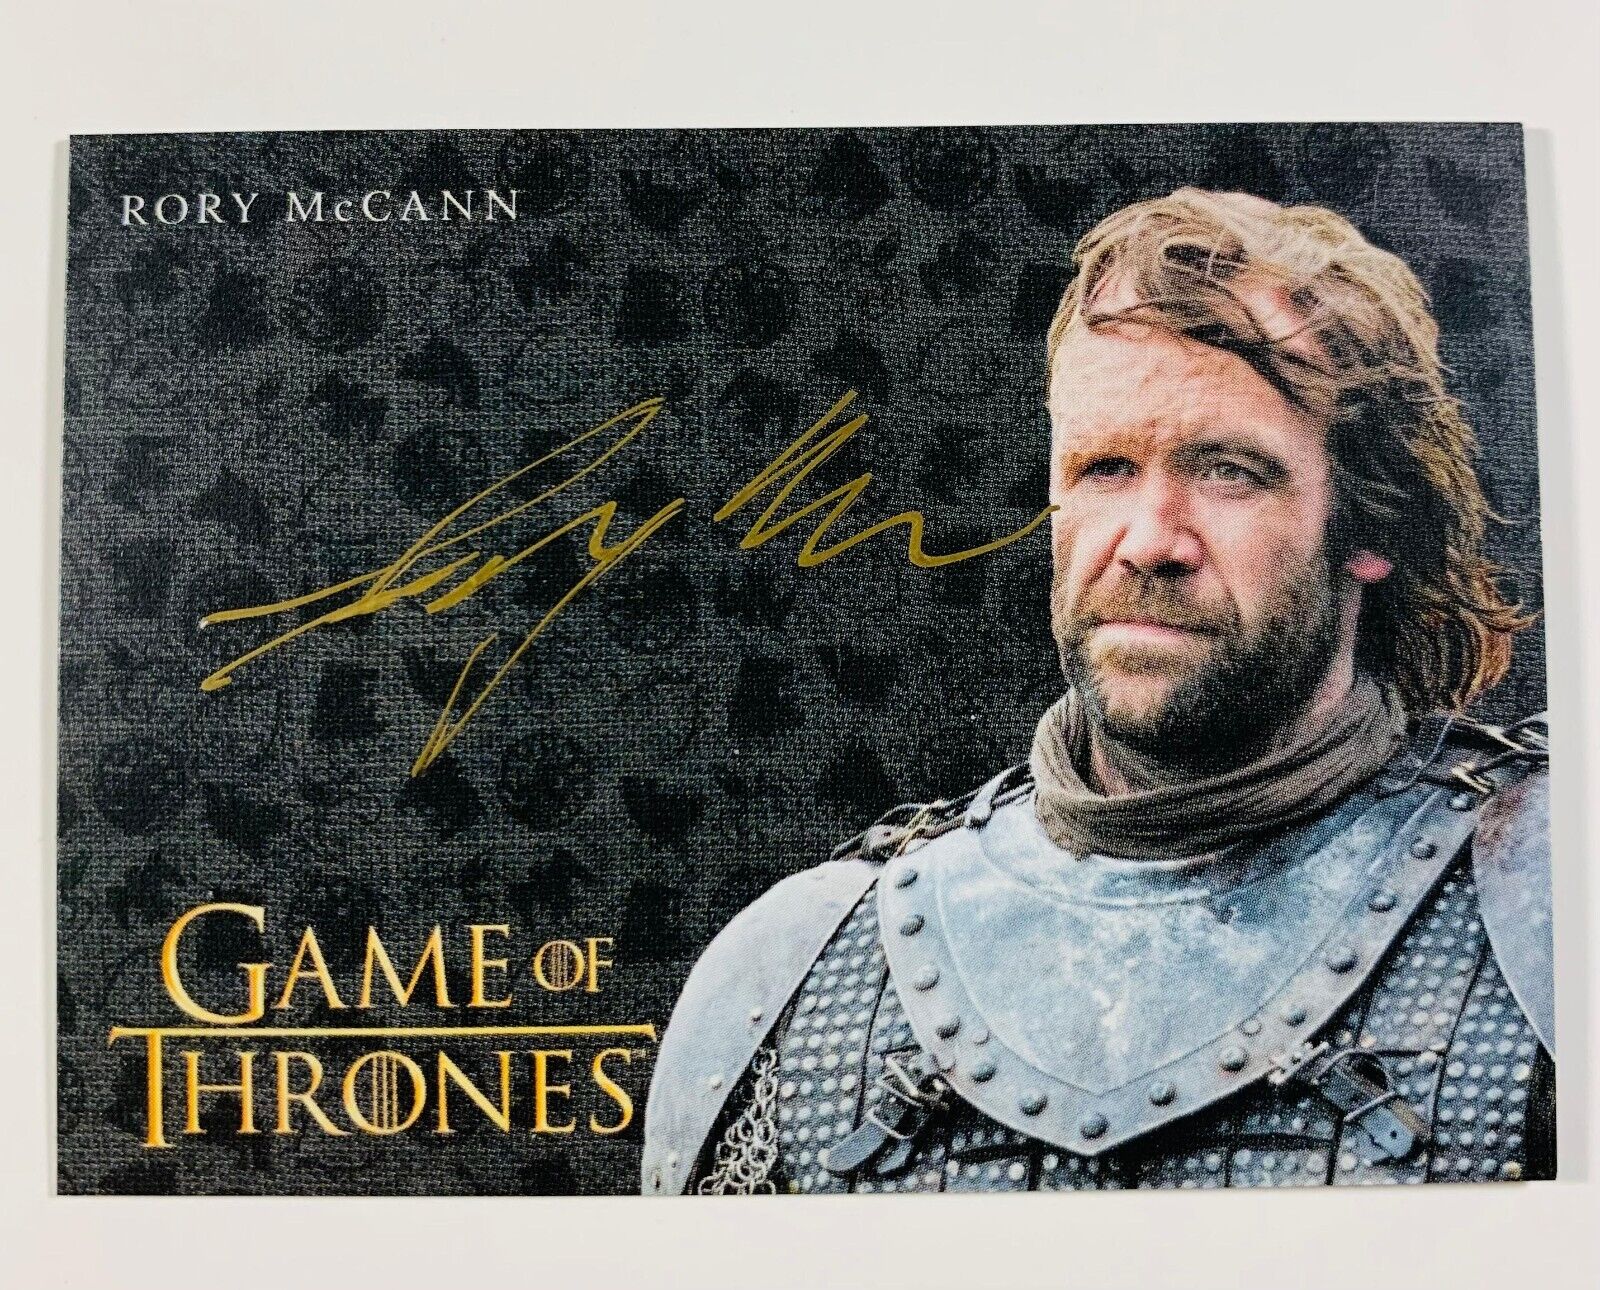 GAME OF THRONES RORY MCCANN AUTO SANDOR CLEGANE HOUND SIGNED AUTOGRAPH CARD 2017